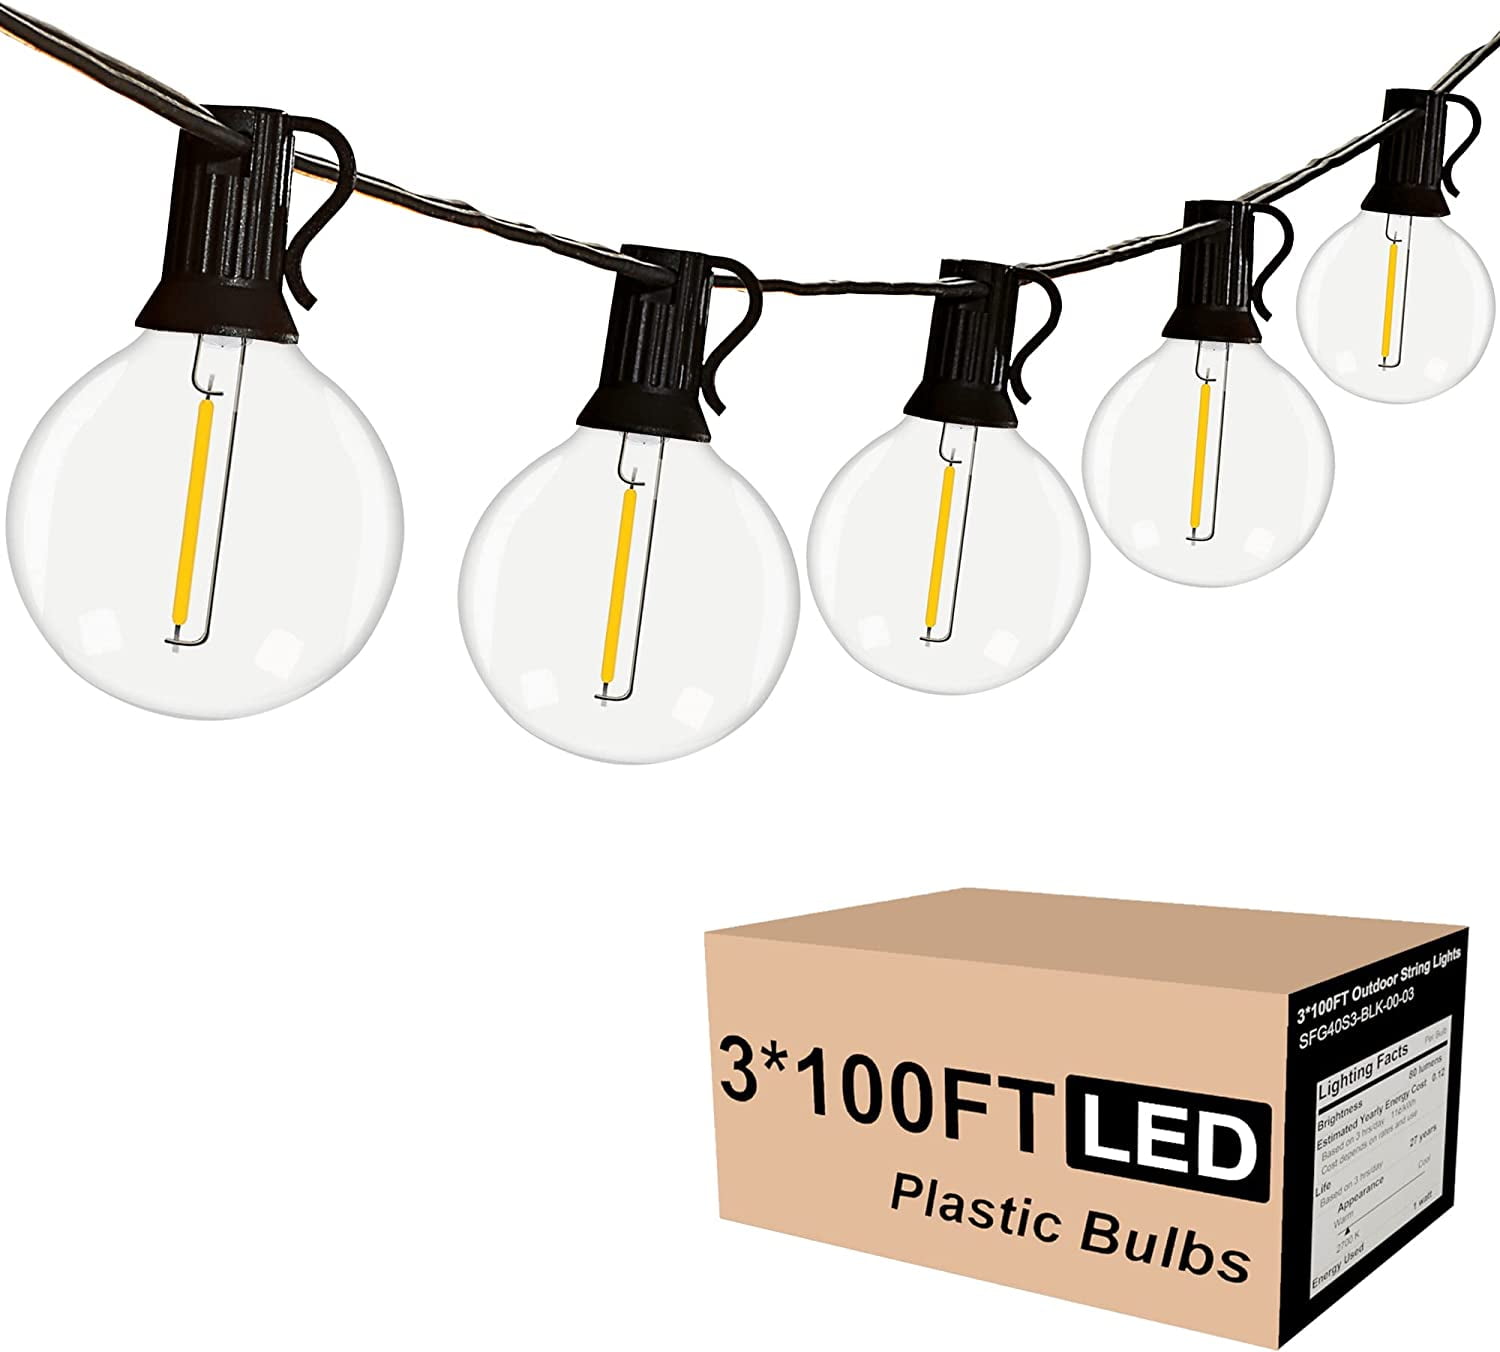 Outdoor String Lights LED 300FT Pack of 100 Feet 150pcs E12 Sockets  with 156pcs G40 1W Dimmable Globe Plastic Bulbs Shatterproof LED Outdoor  String Lights for Outside Patio Backy